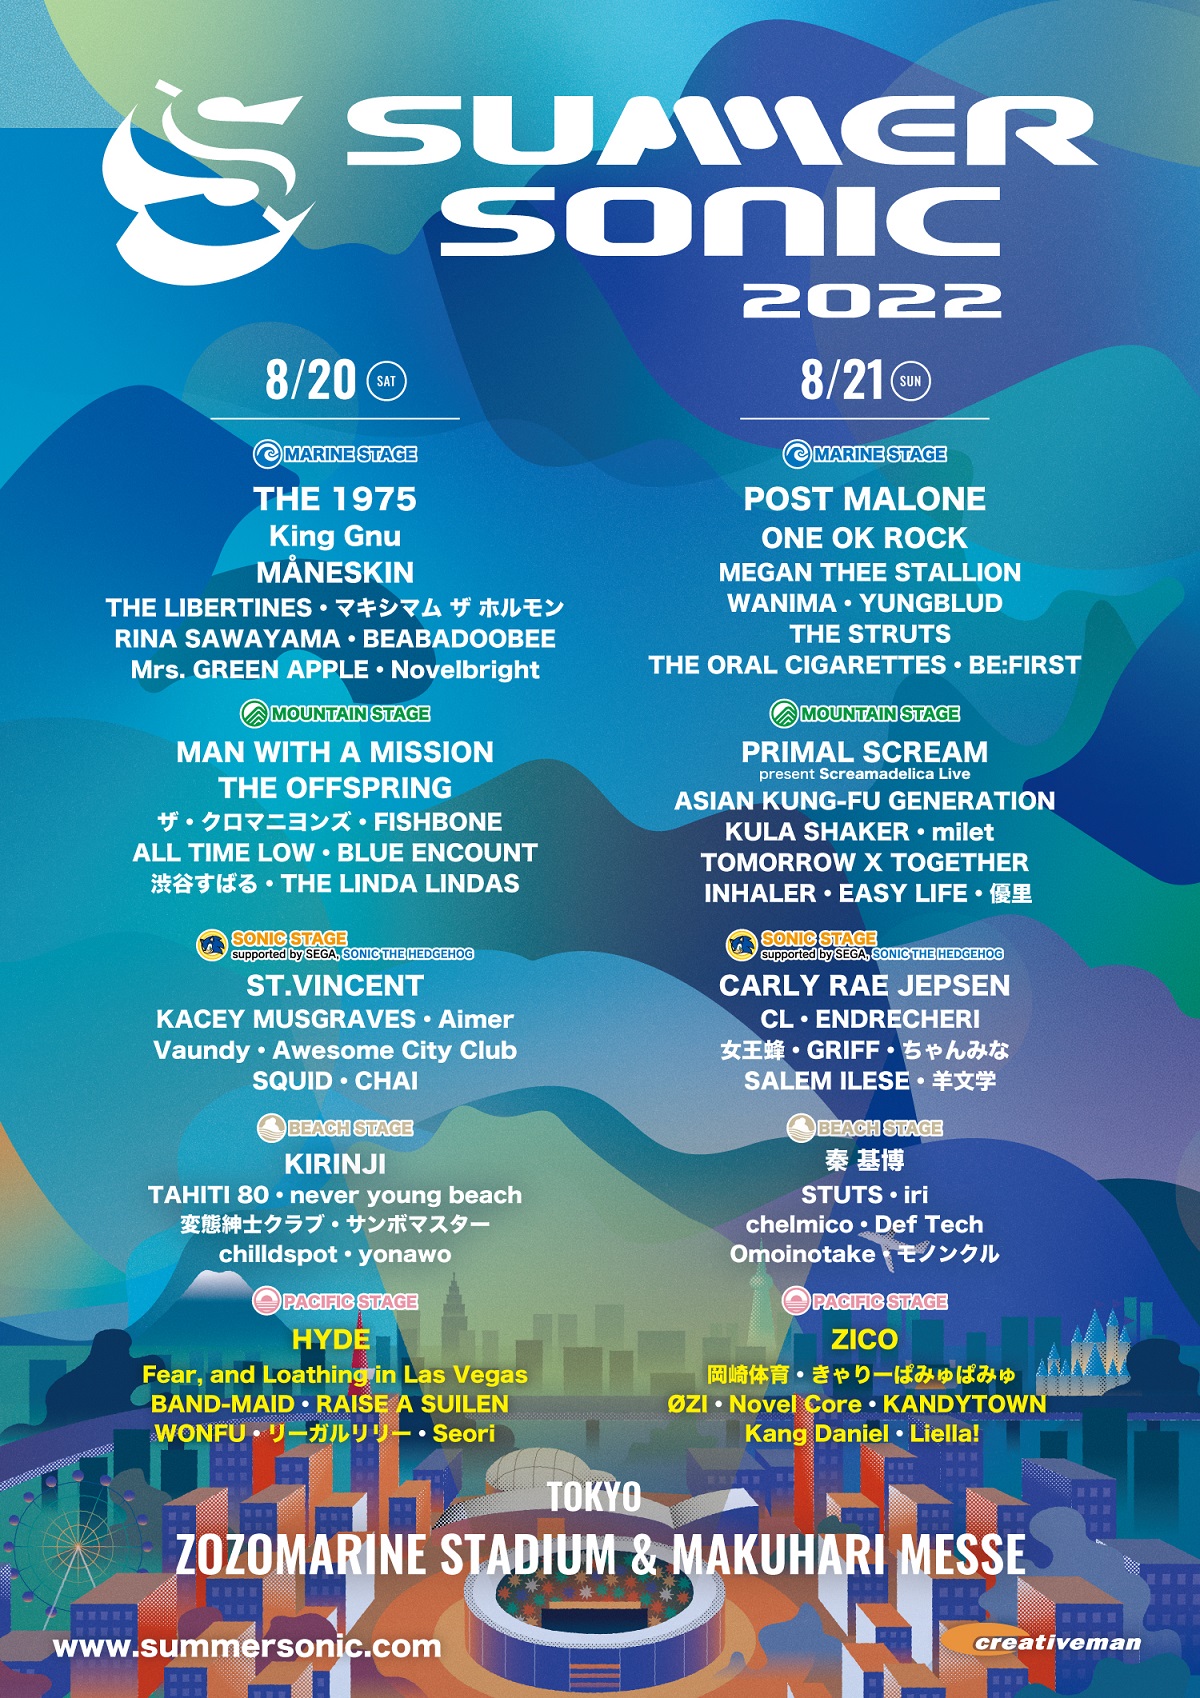 Summer Sonic 22 東京公演pacific Stage出演者発表 Hyde Fear And Loathing In Las Vegas Band Maid Raise A Suilenら登場 激ロック ニュース